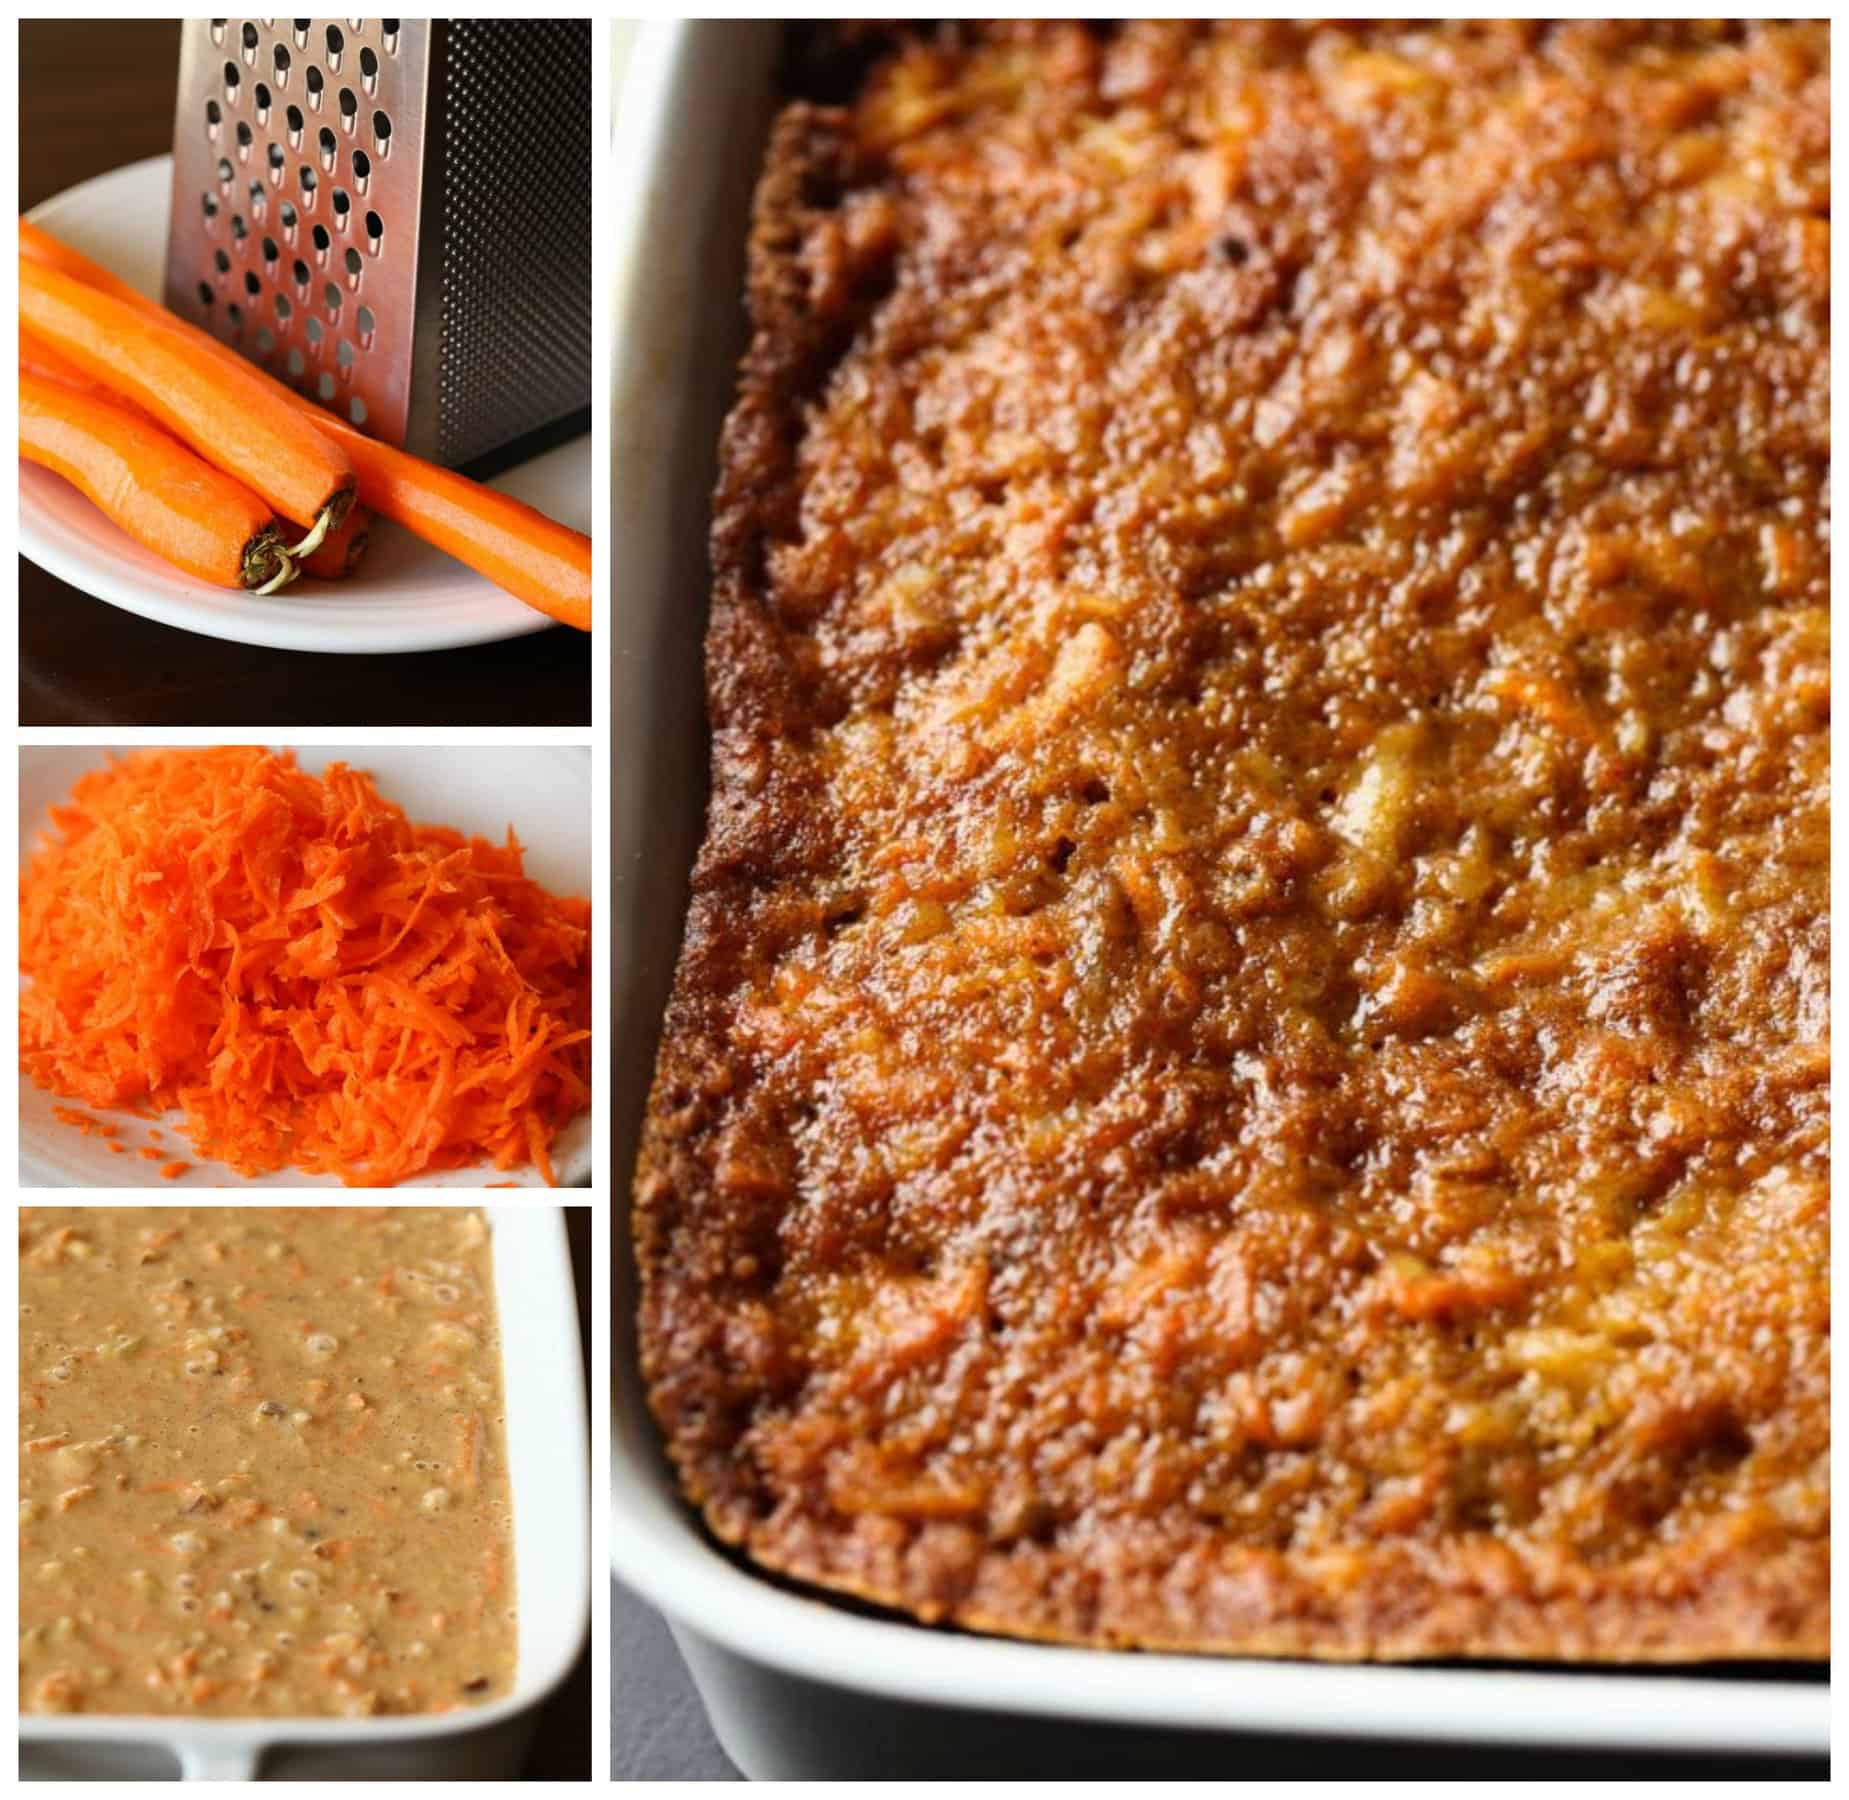 Photo collage of carrots next to a grater, shredded carrots, carrot cake batter in a baking pan, and baked carrot cake in a pan